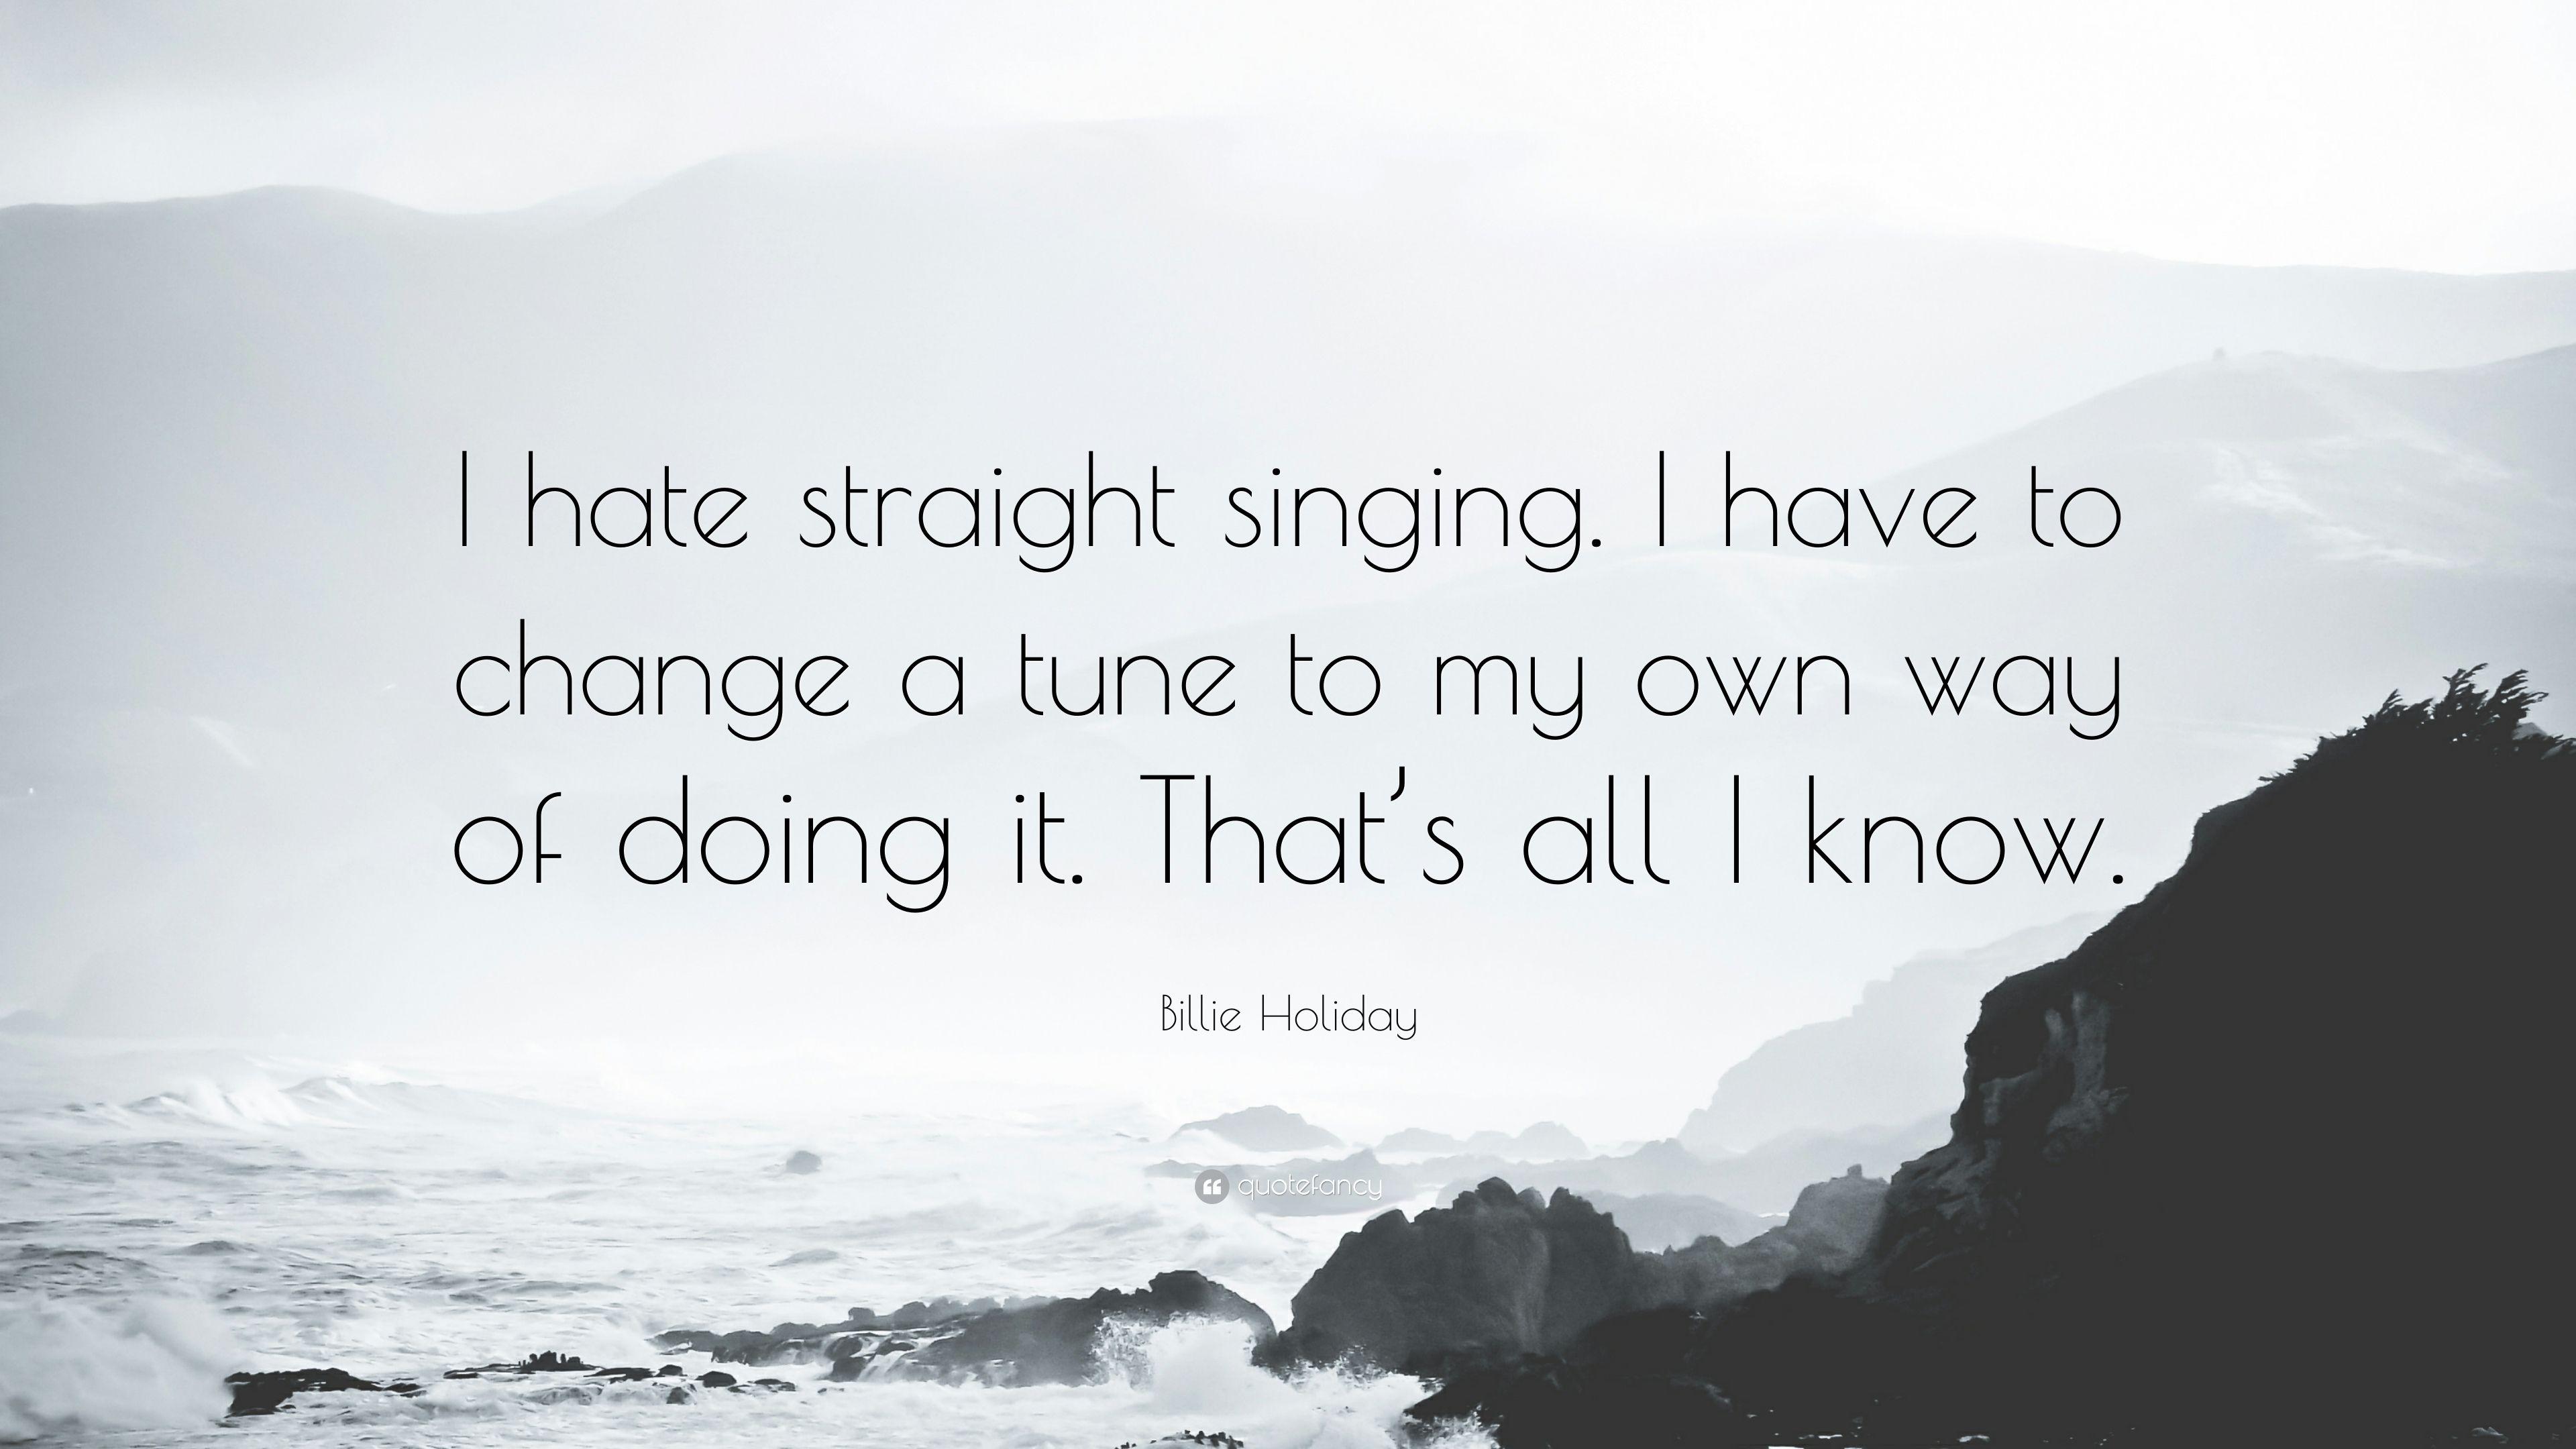 Billie Holiday Quote: “I hate straight singing. I have to change a